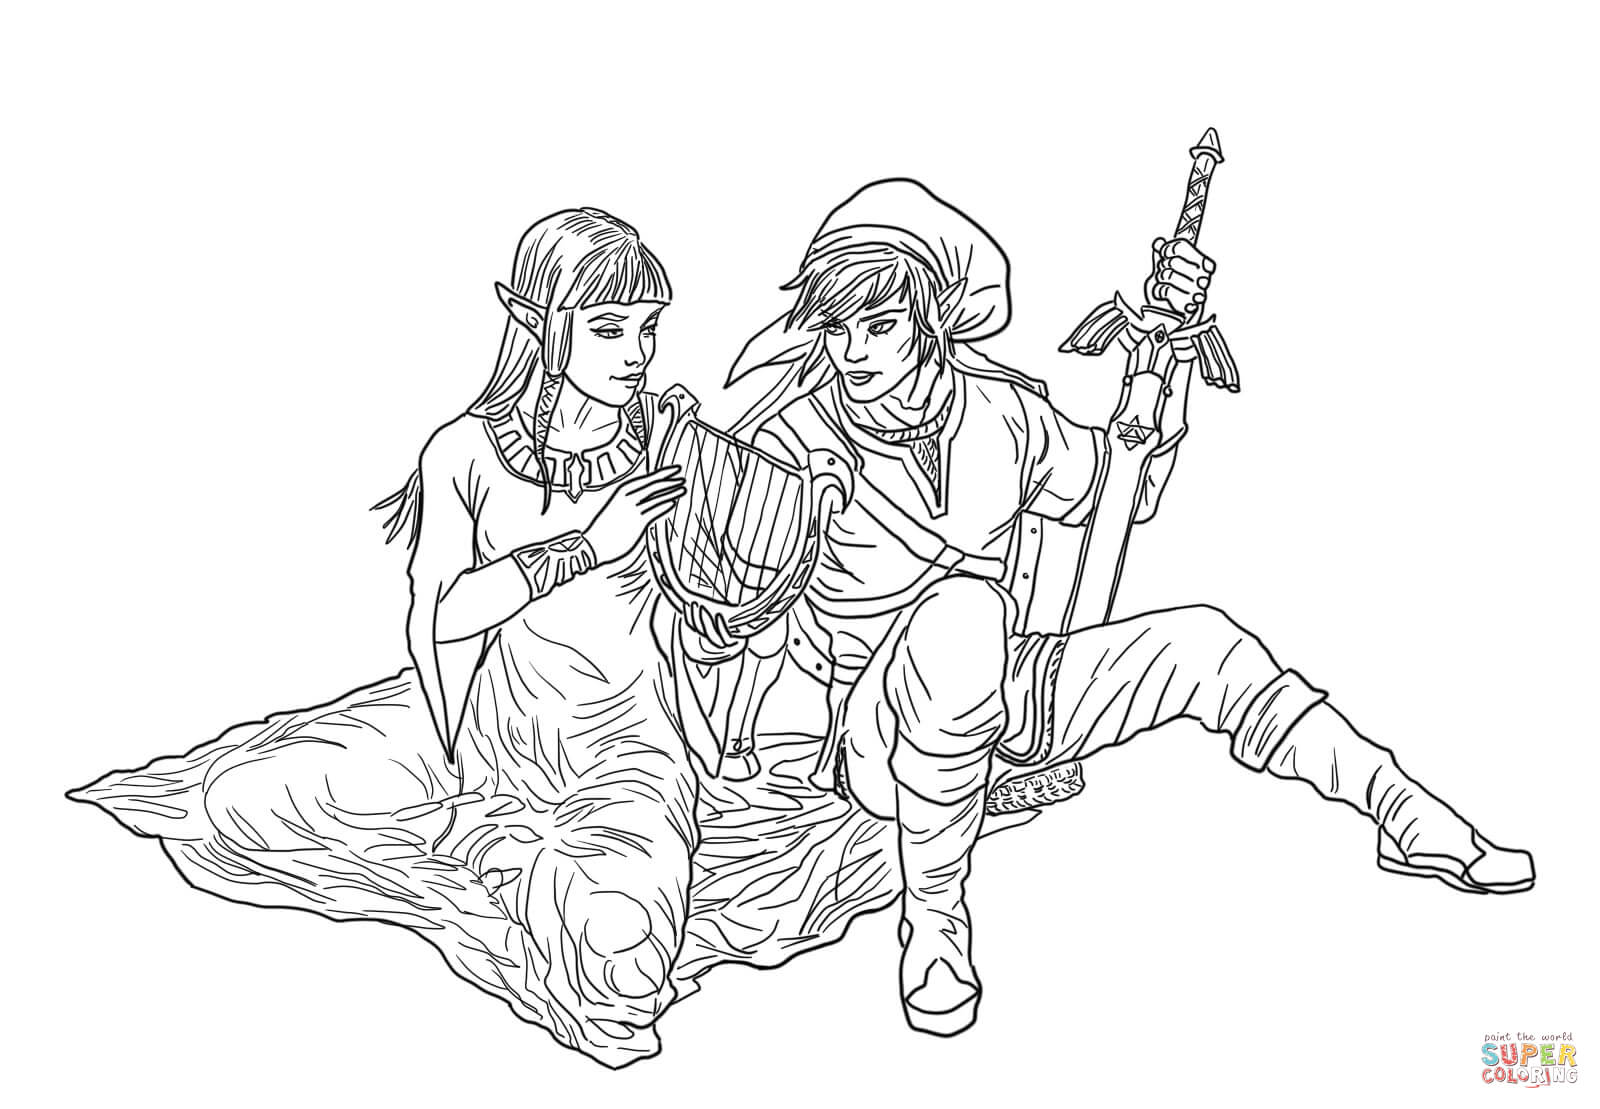 Link and zelda coloring page free printable coloring pages